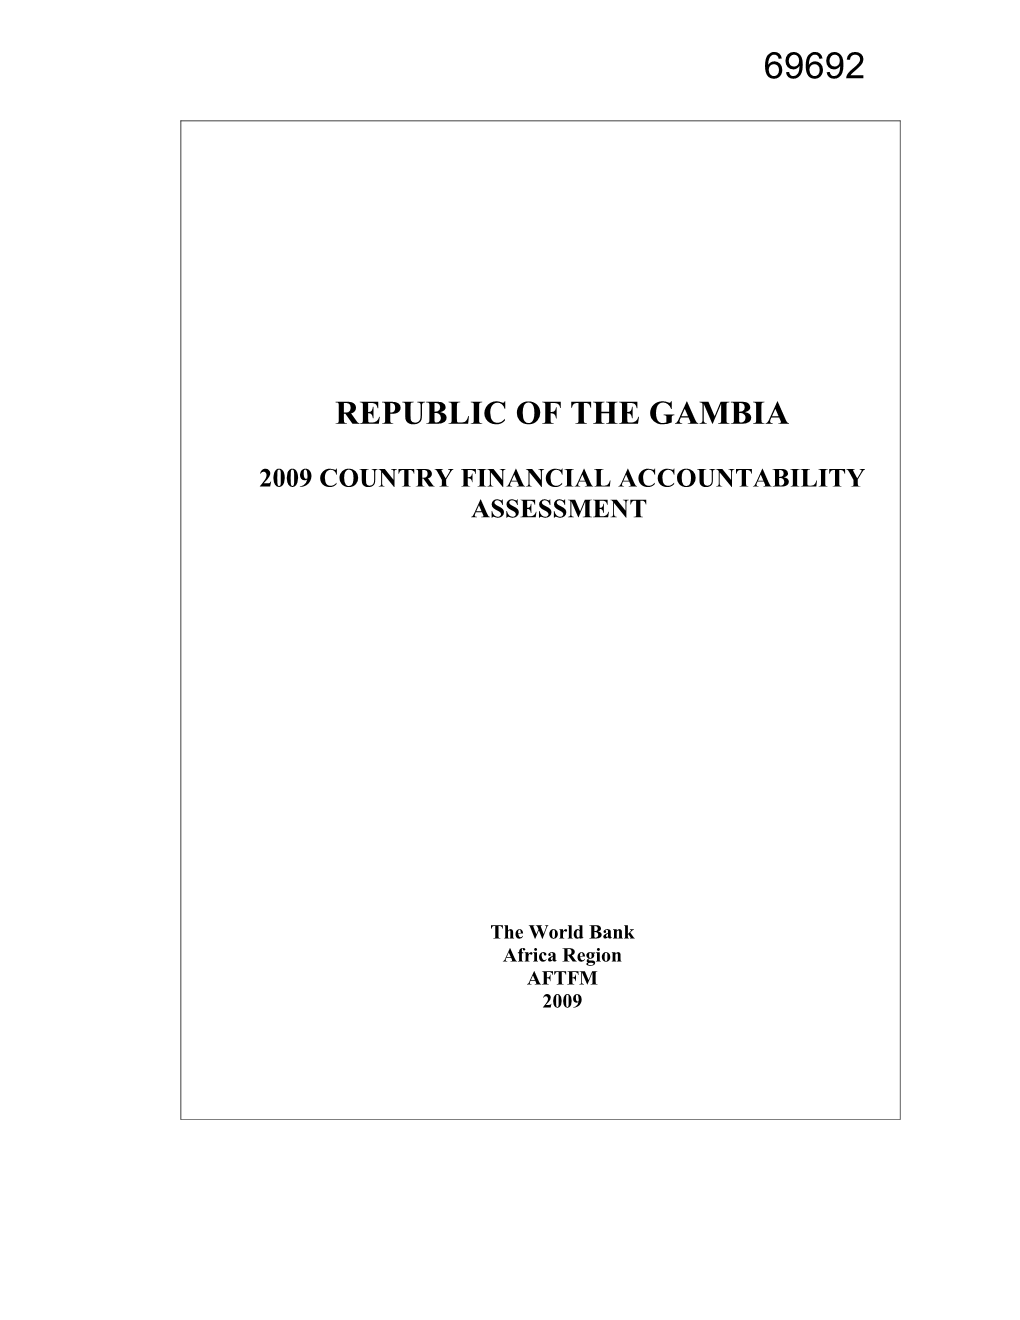 2009 Country Financial Accountability Assessment